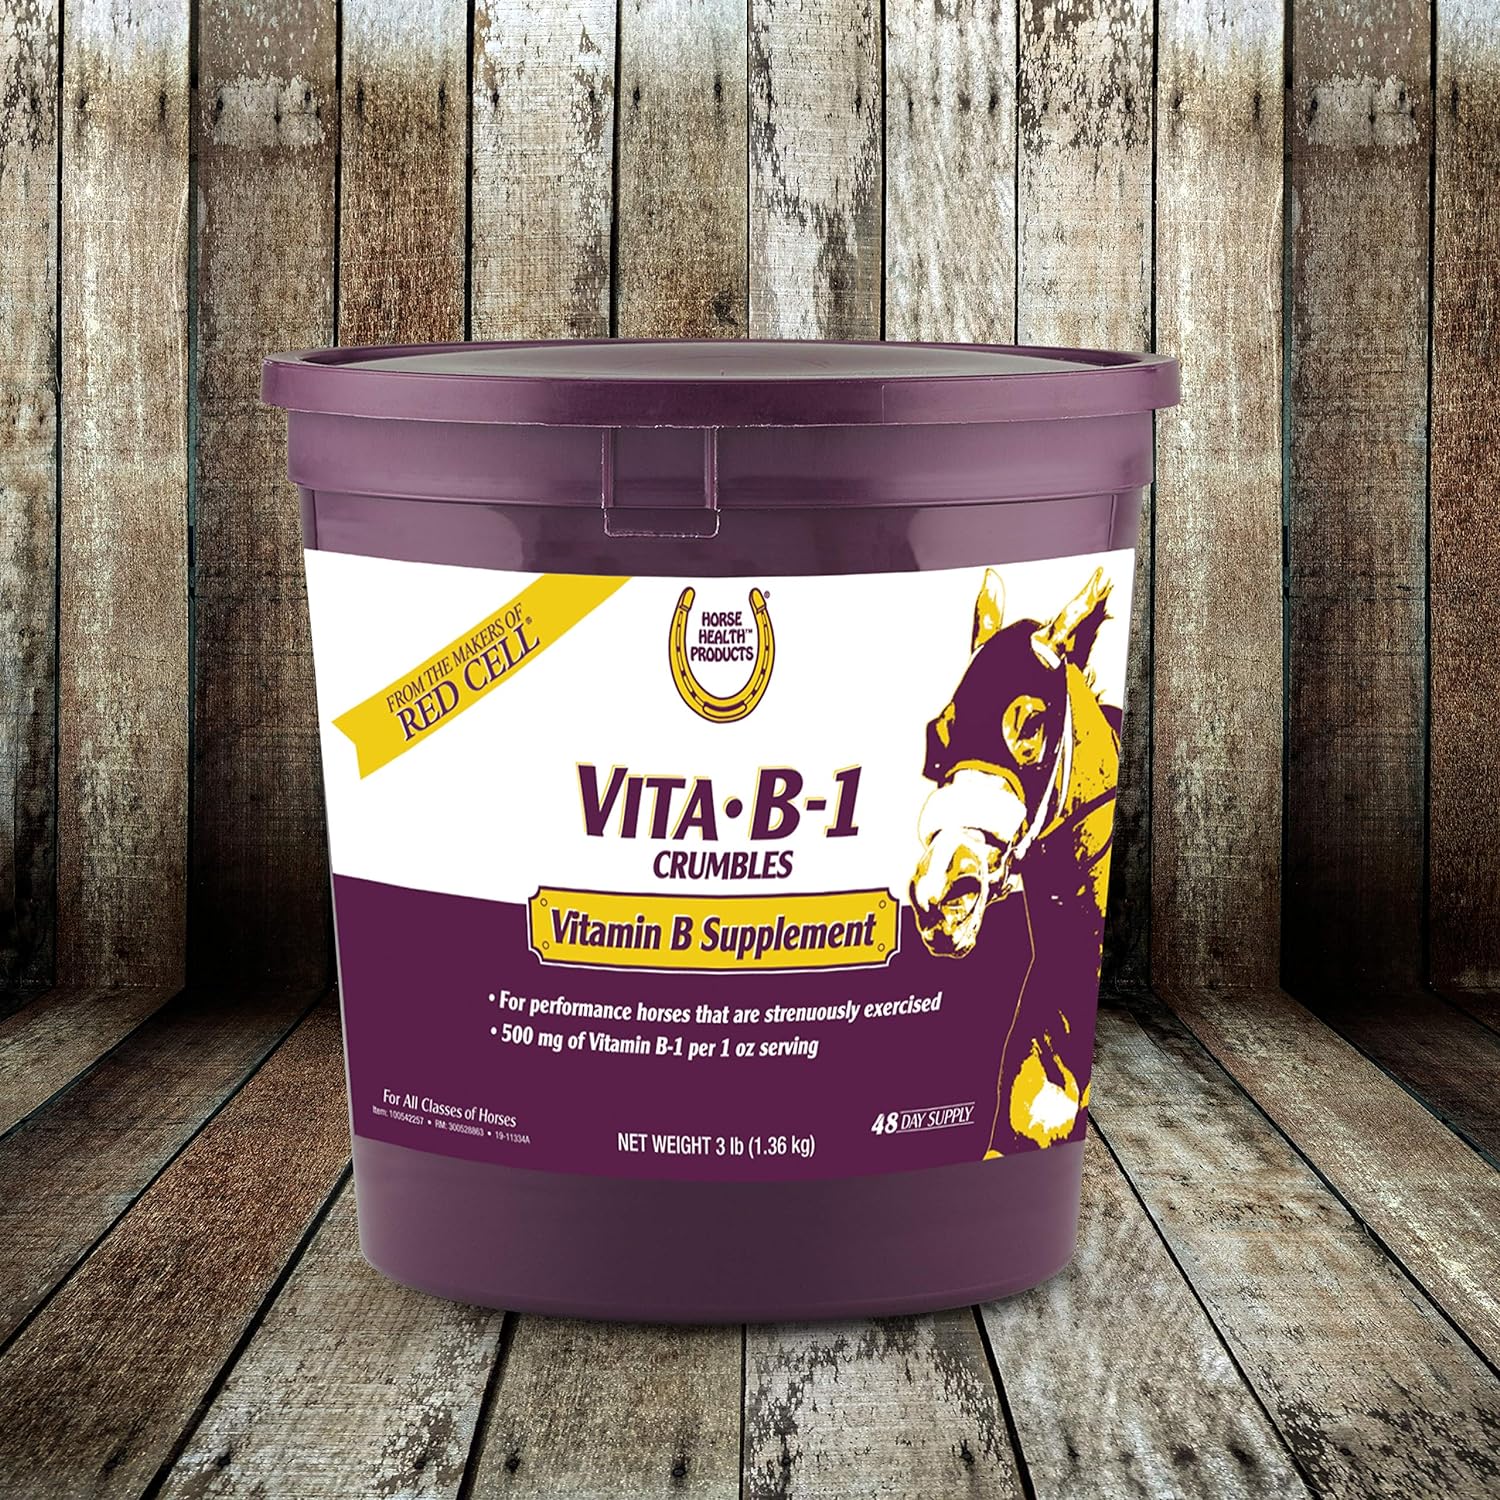 Horse Health Vita B-1 Crumbles Supplement for Horses, Supports optimal muscle activity and metabolis